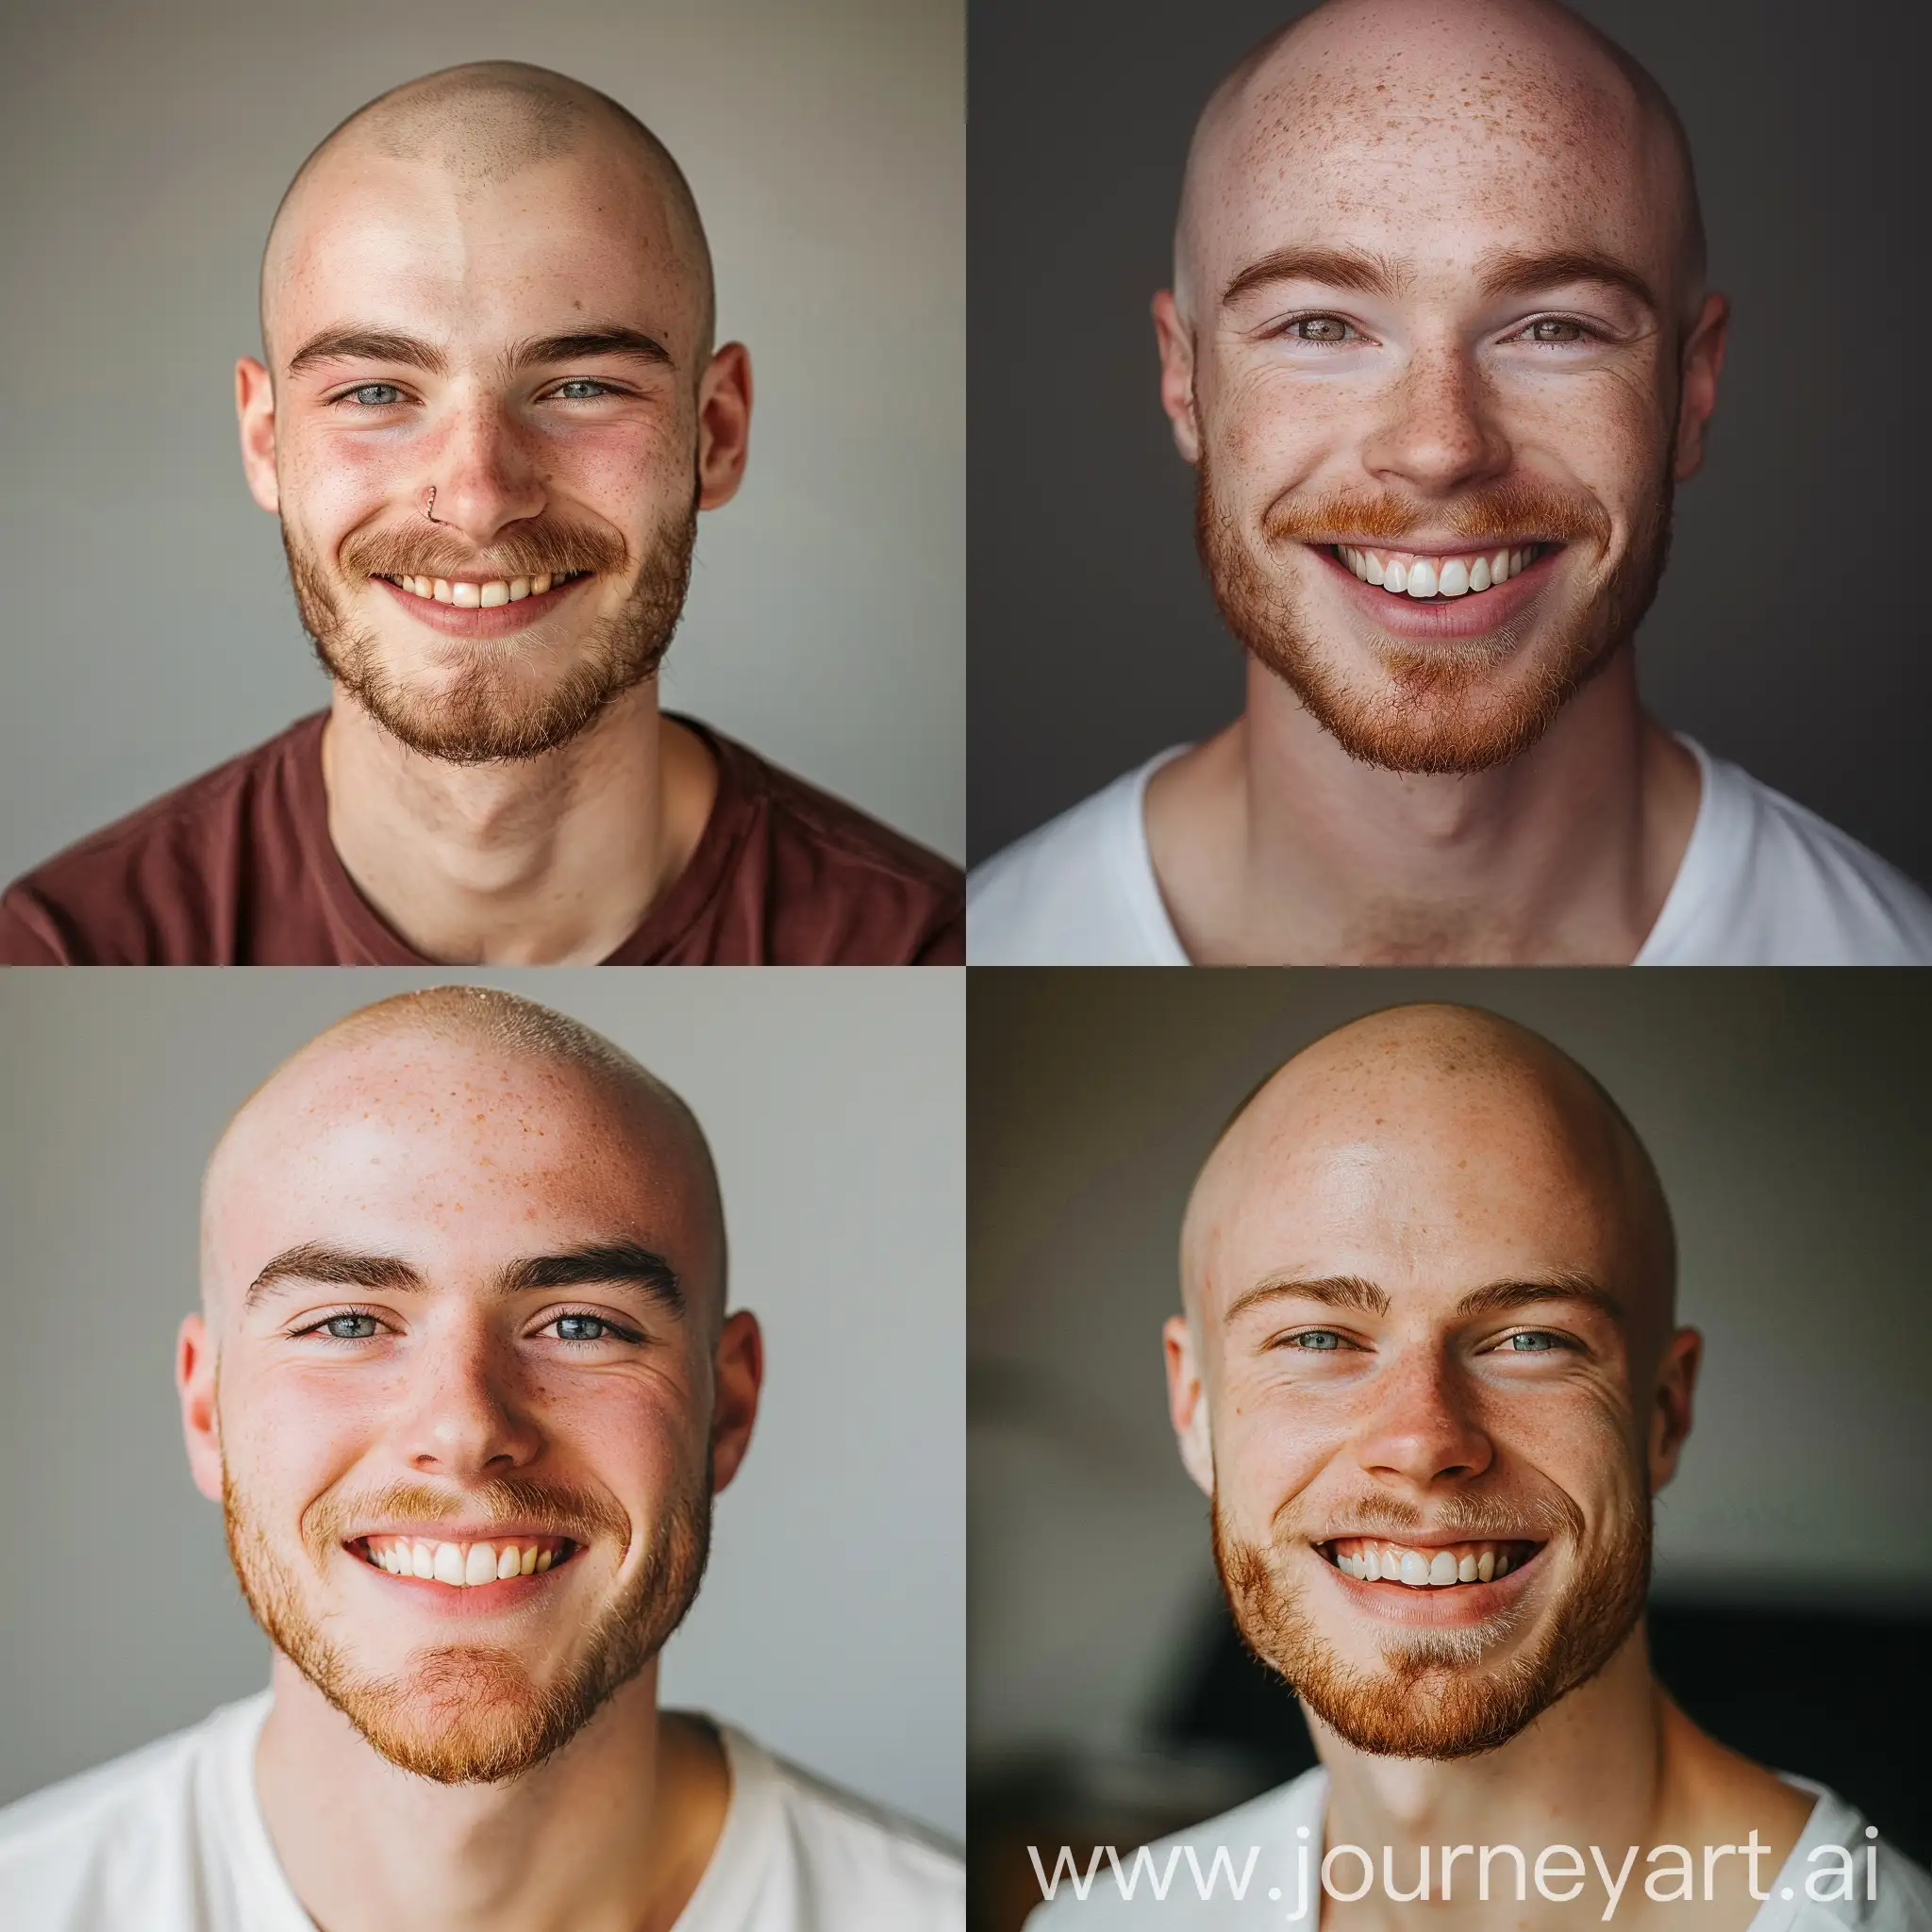 Smiling-Mediumheight-Bearded-Man-with-Flushed-Skin